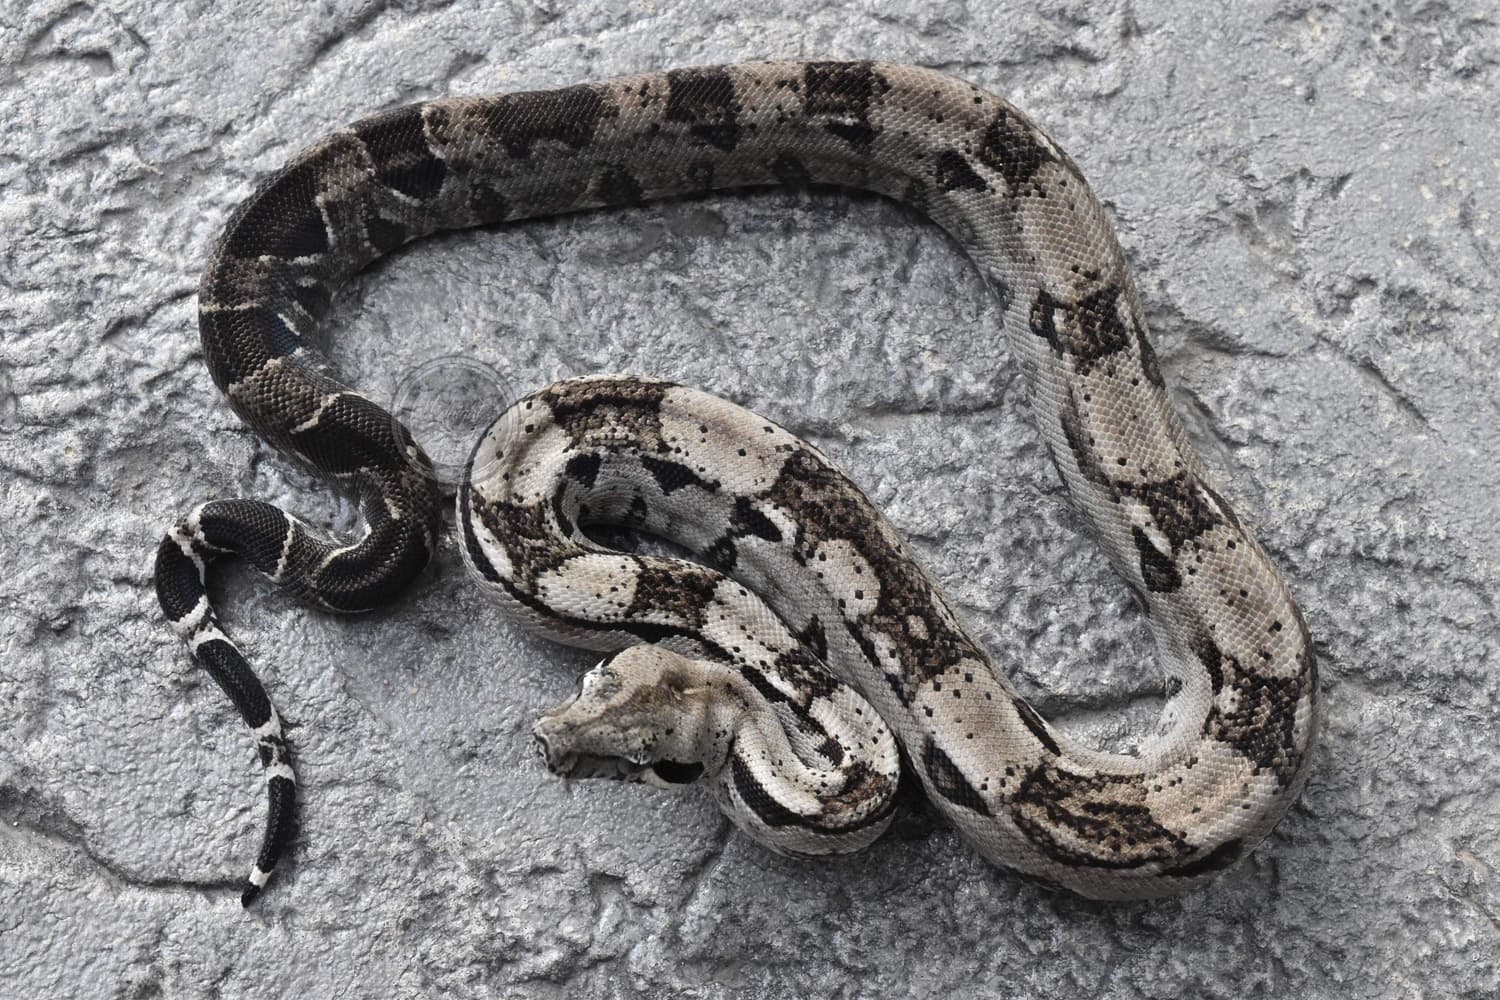 Type 2 Anery Boa Constrictor by Crgreptiles